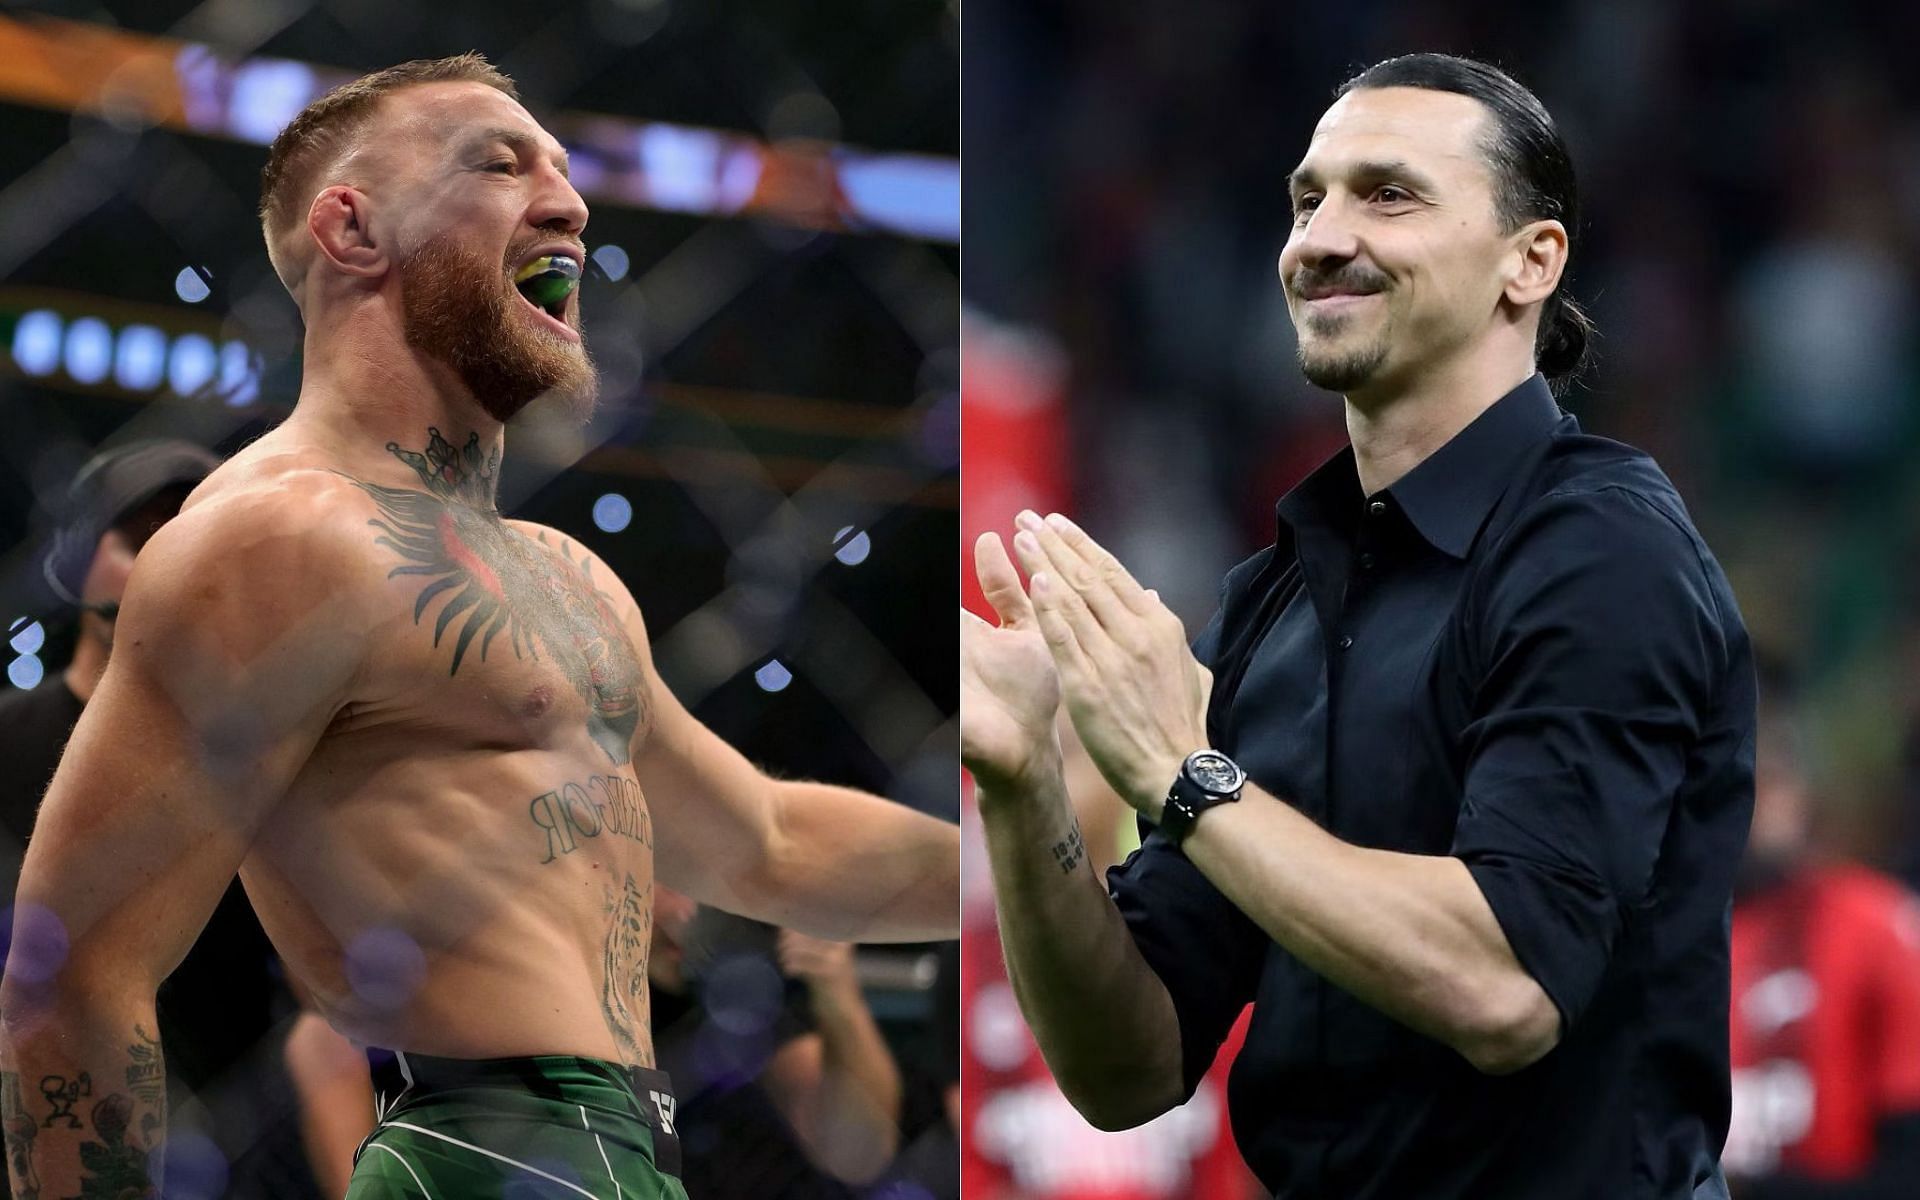 Conor McGregor (left) and Zlatan Ibrahimovic (right)